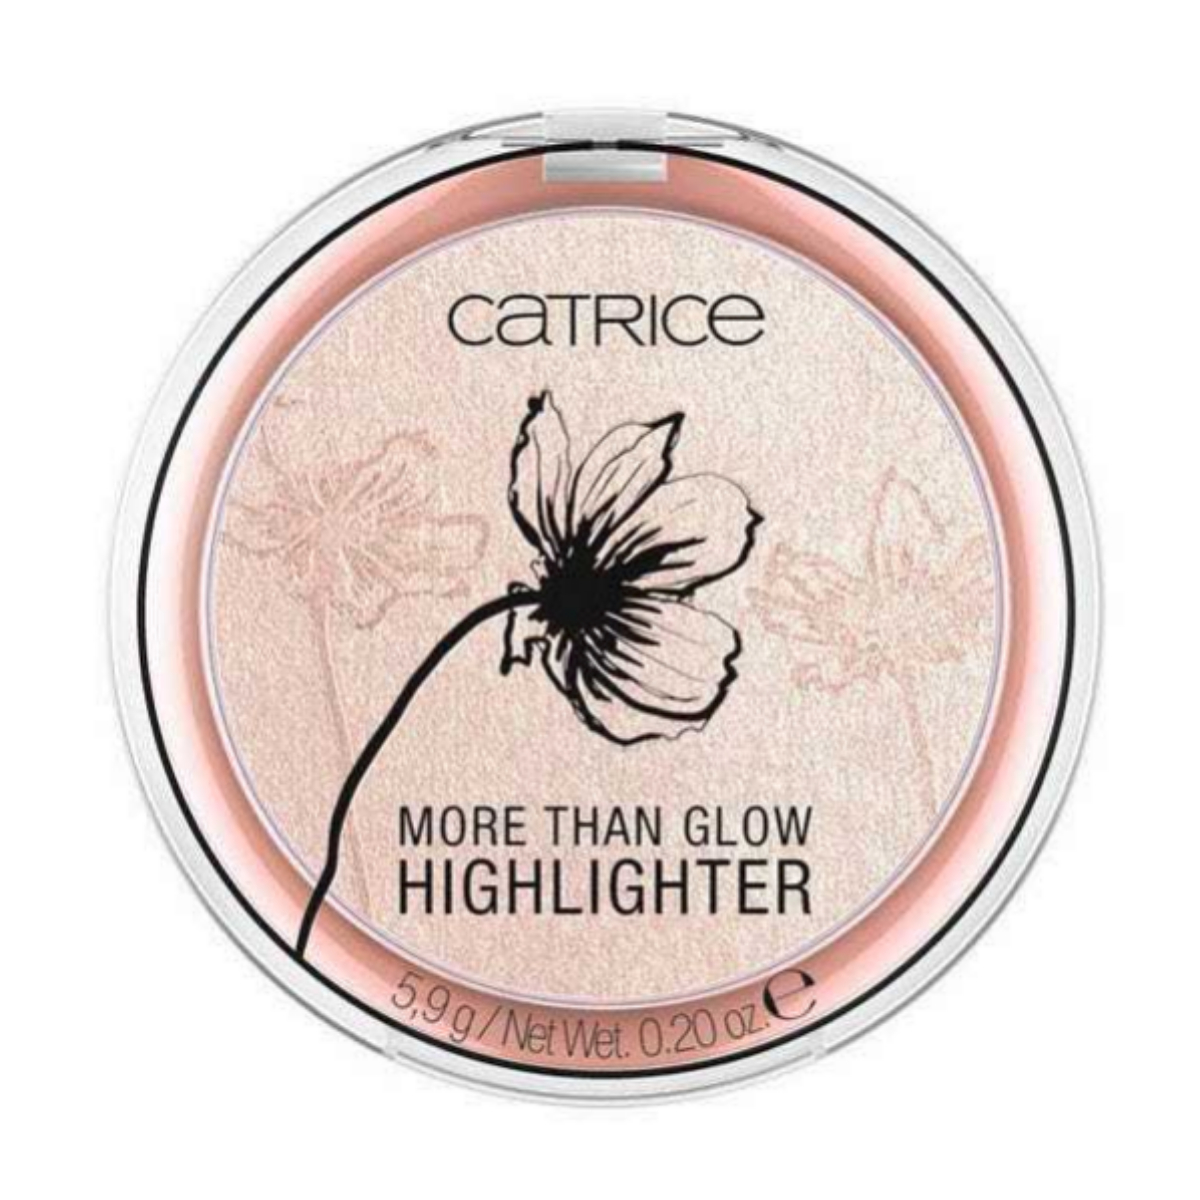 More than Glow Highlighter, de Catrice